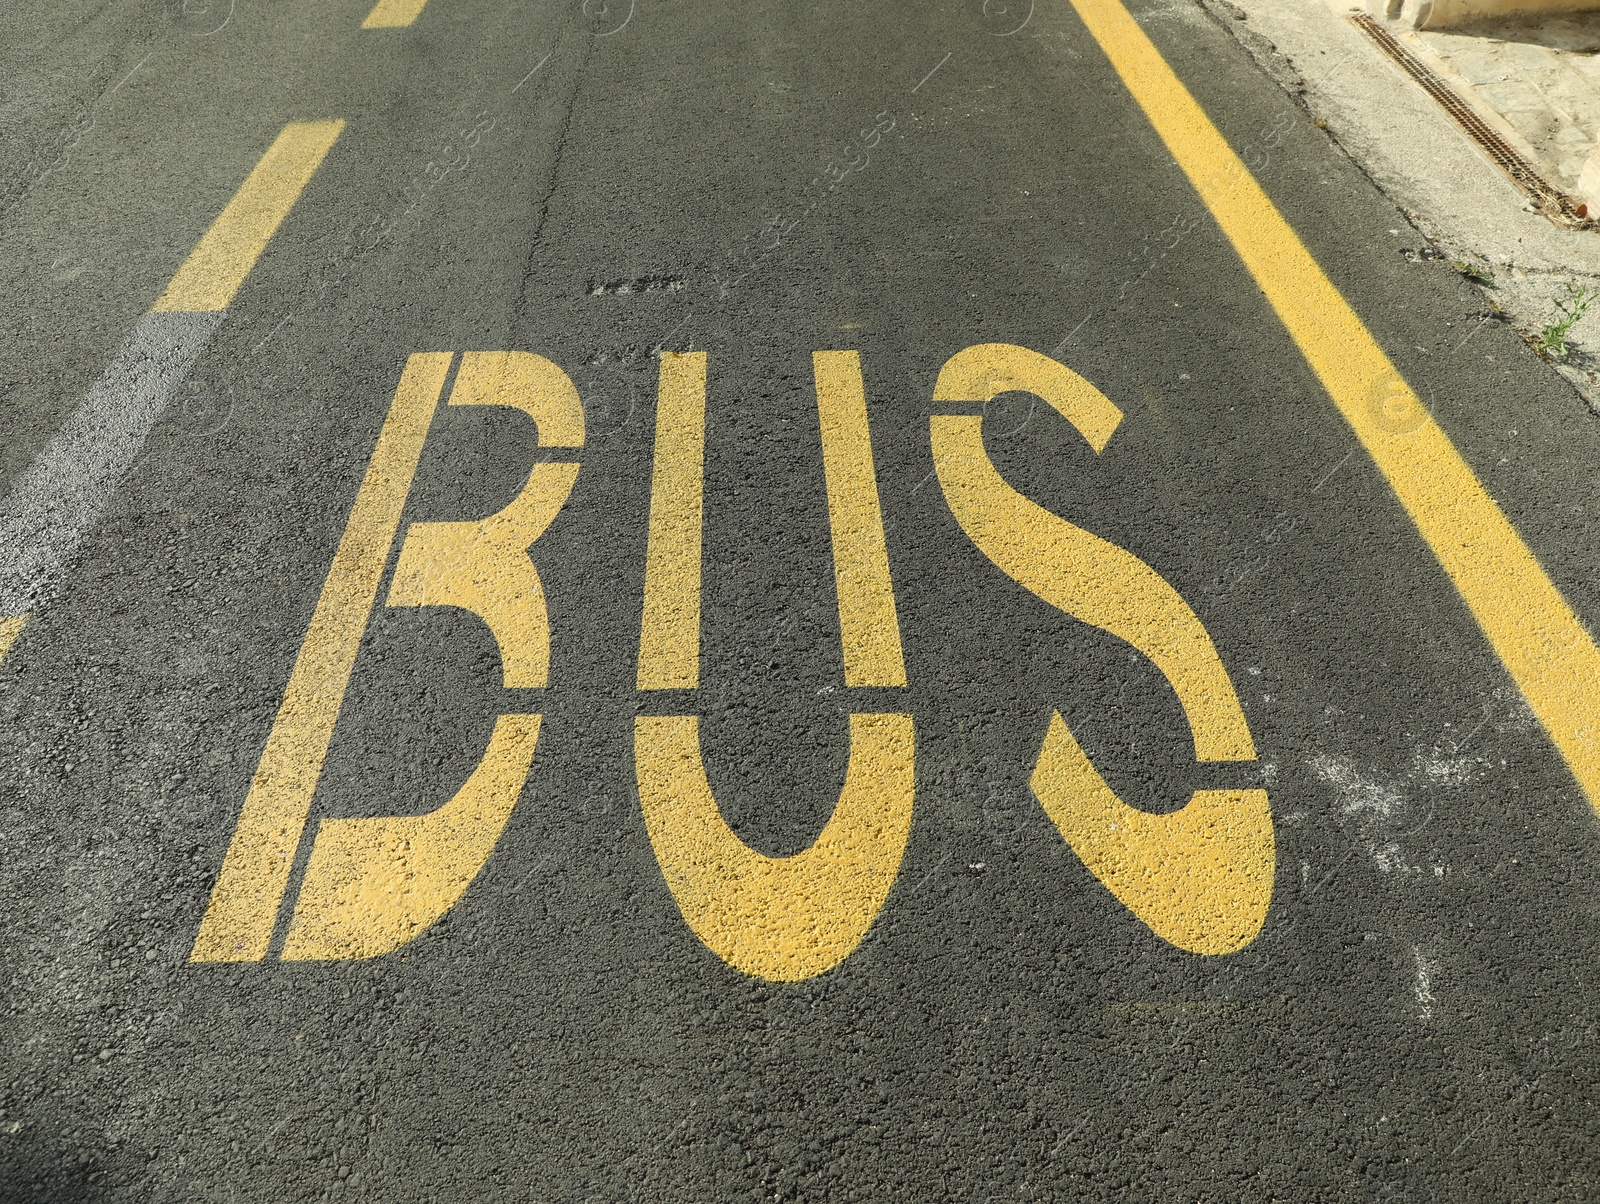 Photo of Bus stop pad on asphalt road on sunny day